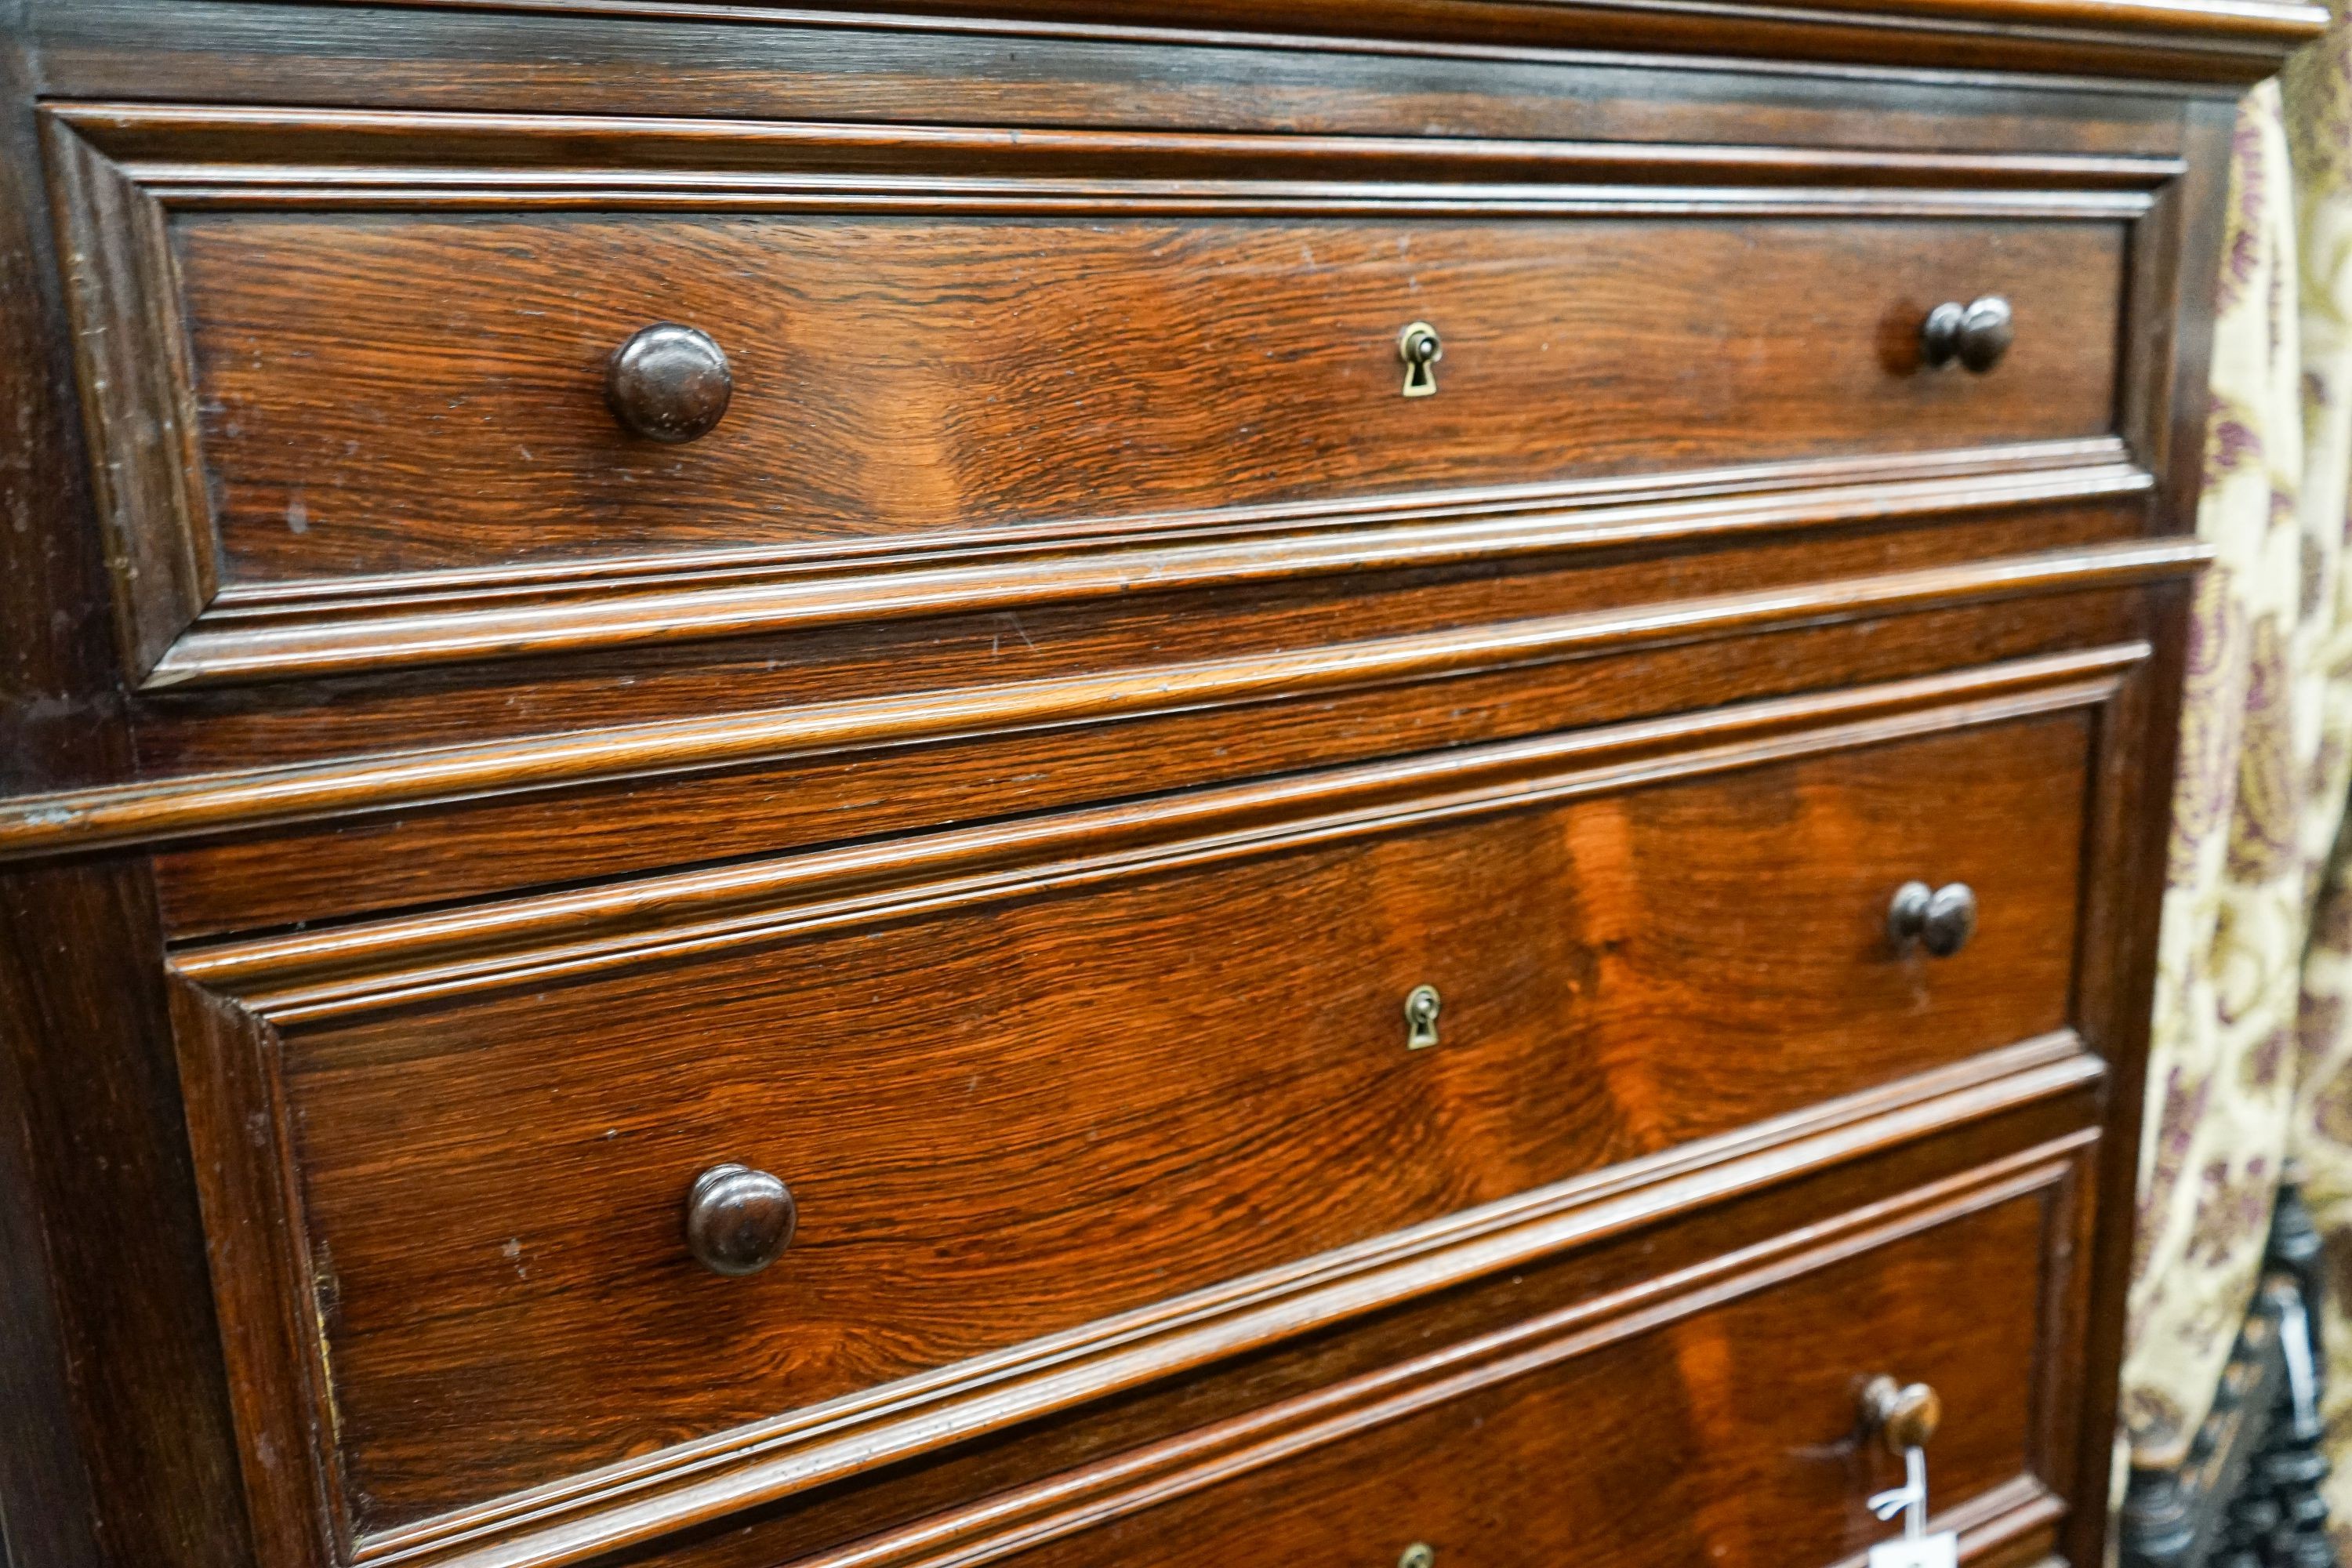 A 19th century French rosewood tall secretaire chest, width 80cm, depth 44cm, height 156cm